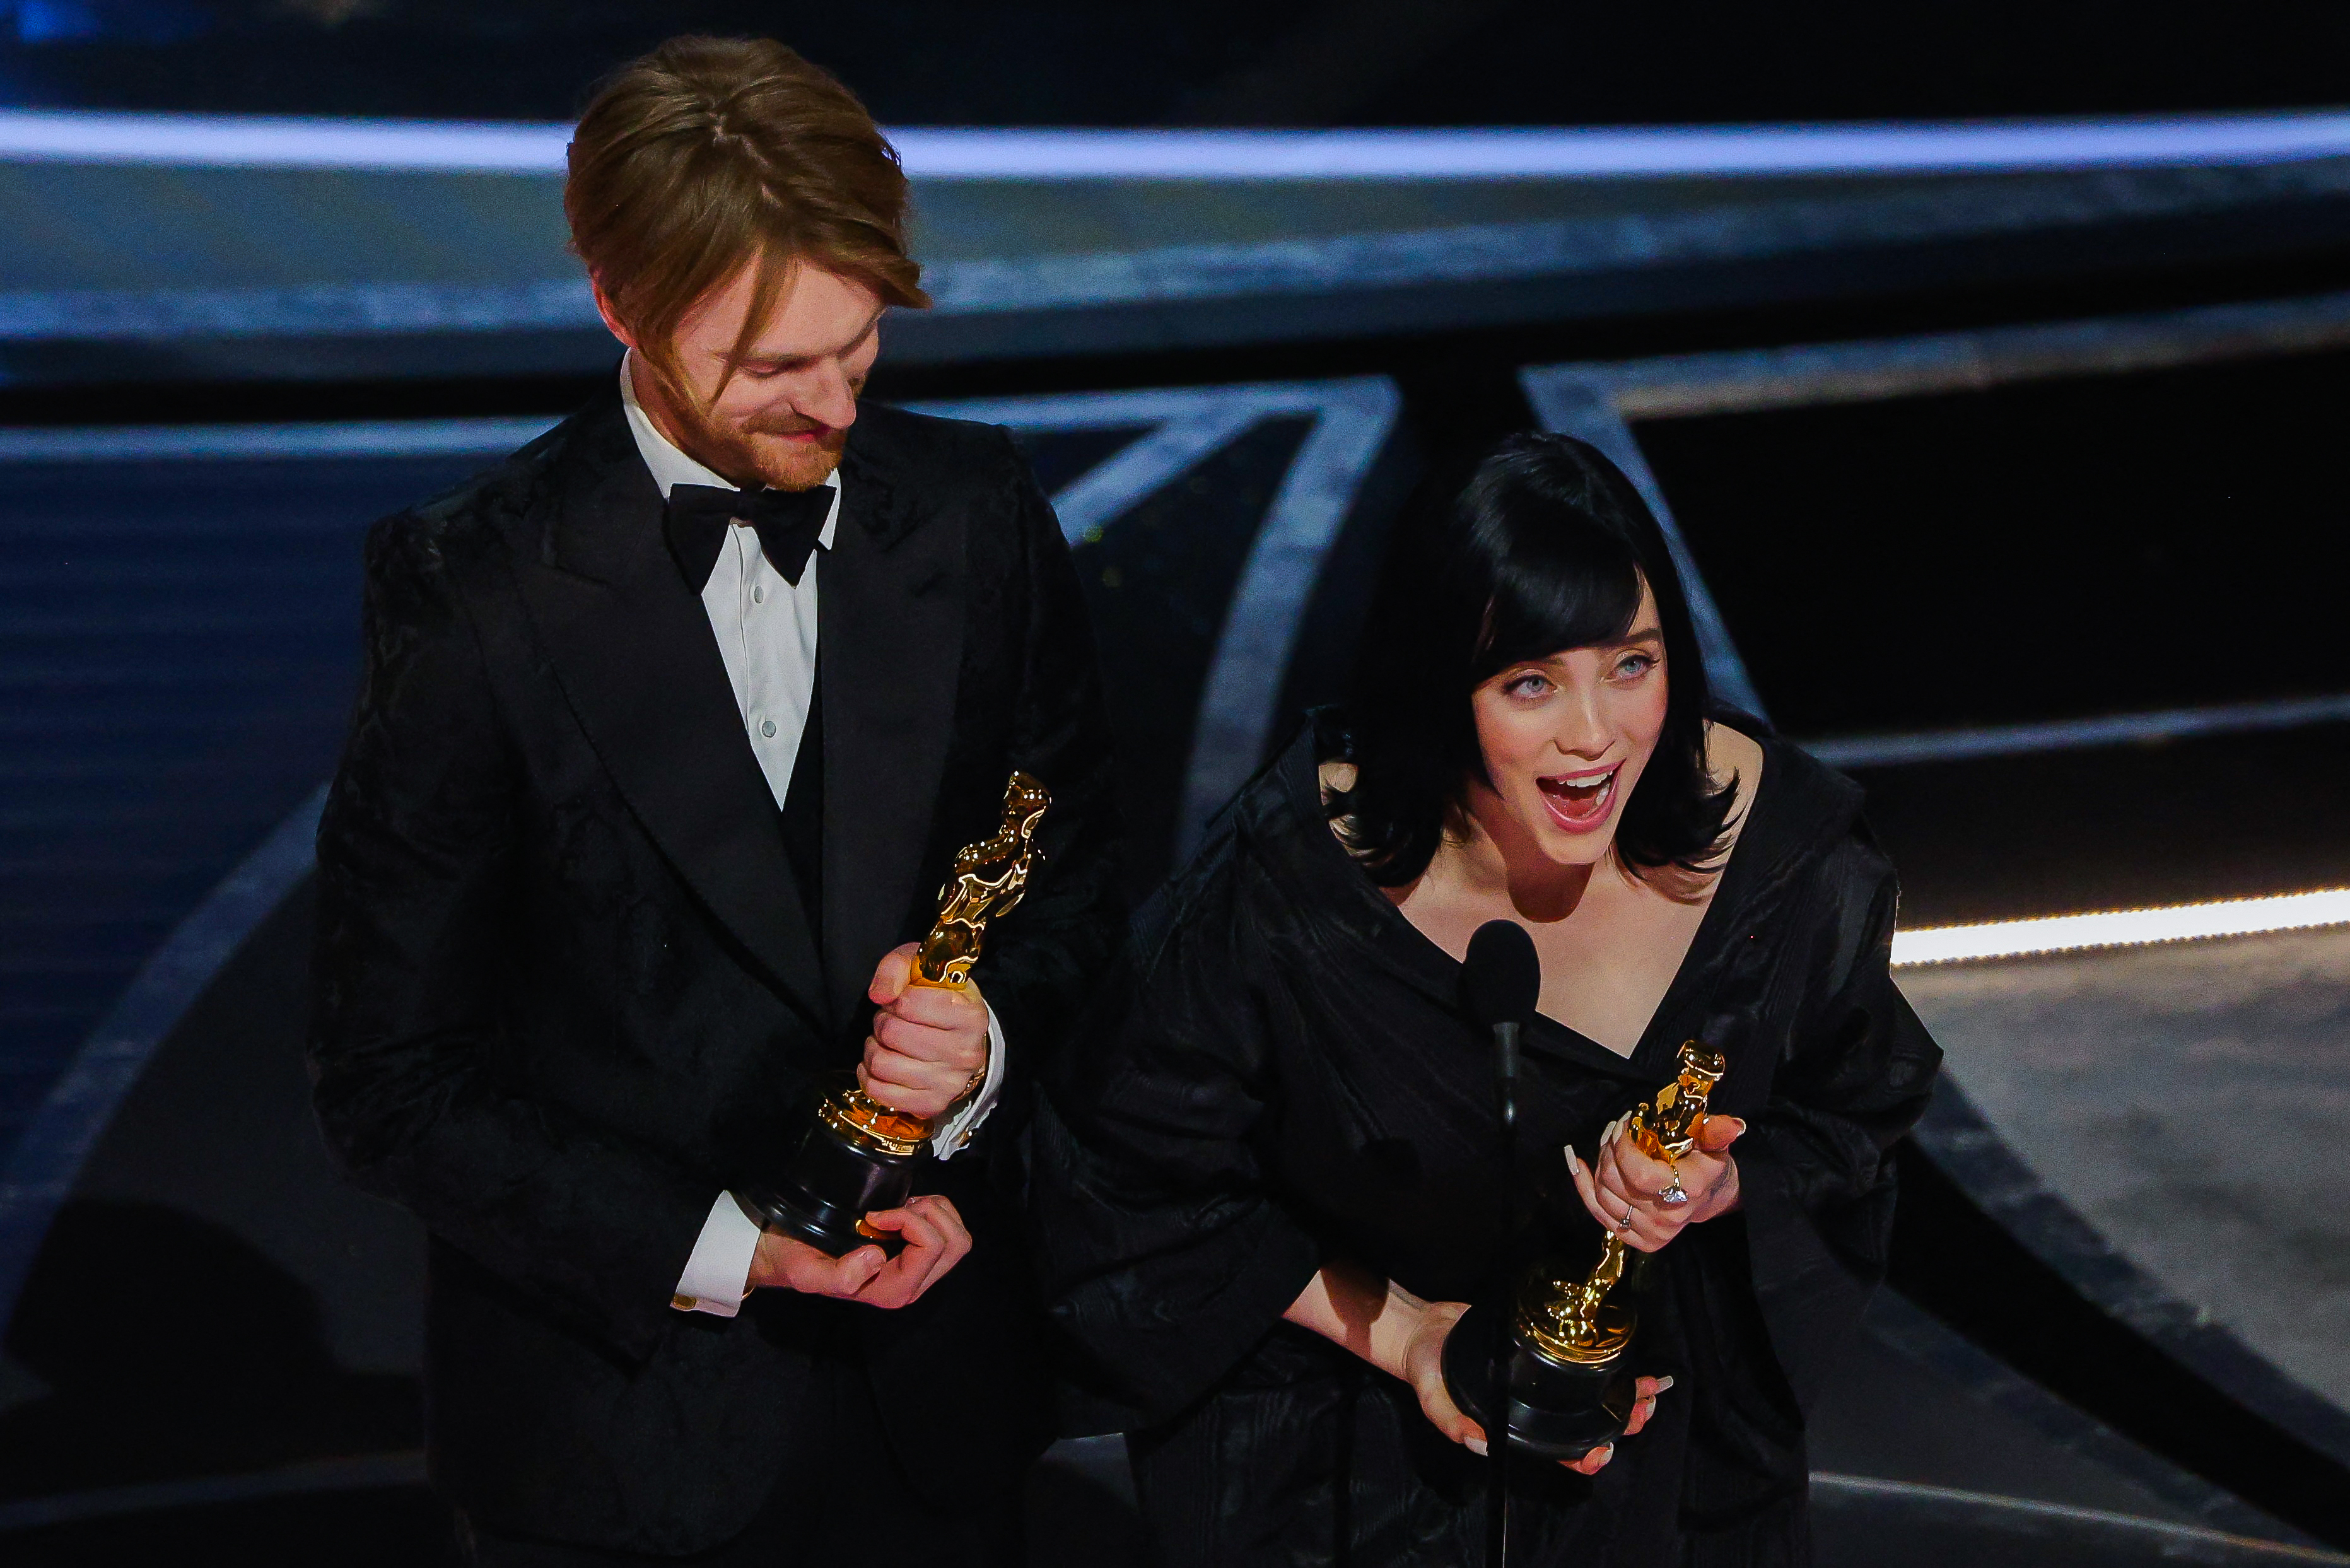 Billie Eilish and Finneas O'Connell win the Oscar for Best Original Song for "No Time to Die" from the James Bond film at the 94th Academy Awards in Hollywood, Los Angeles, California, US, March 27, 2022. REUTERS/Brian Snyder